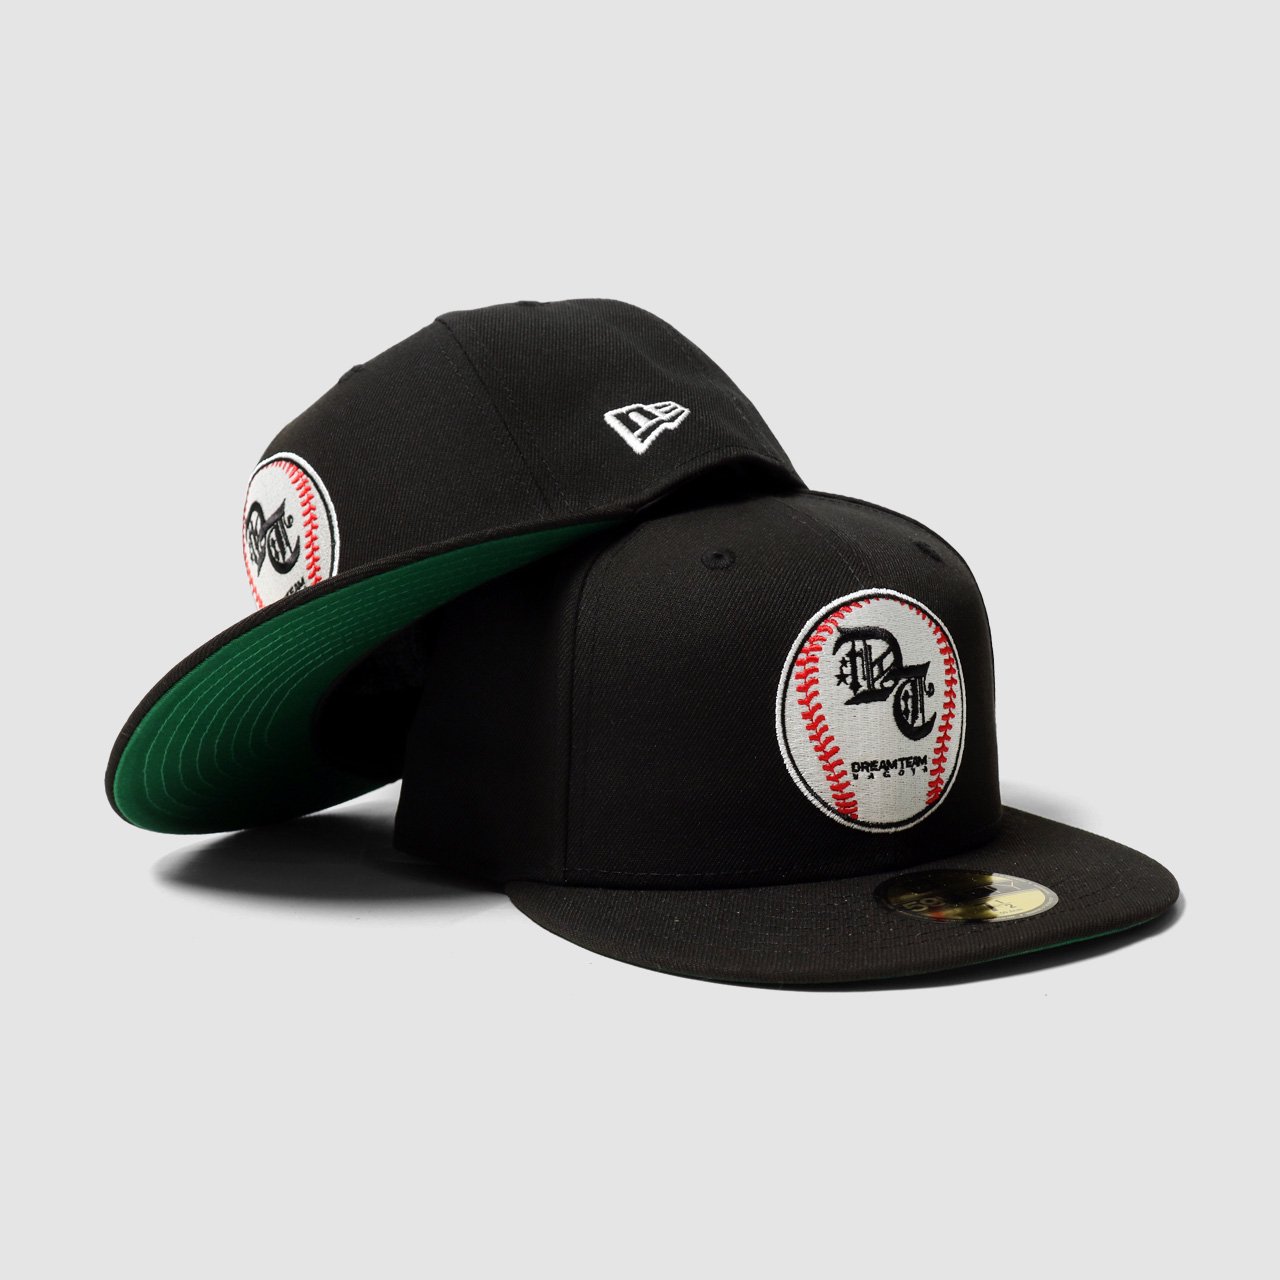 【Revival】DREAMTEAM BB Logo New Era 59Fifty Fitted Cap Black